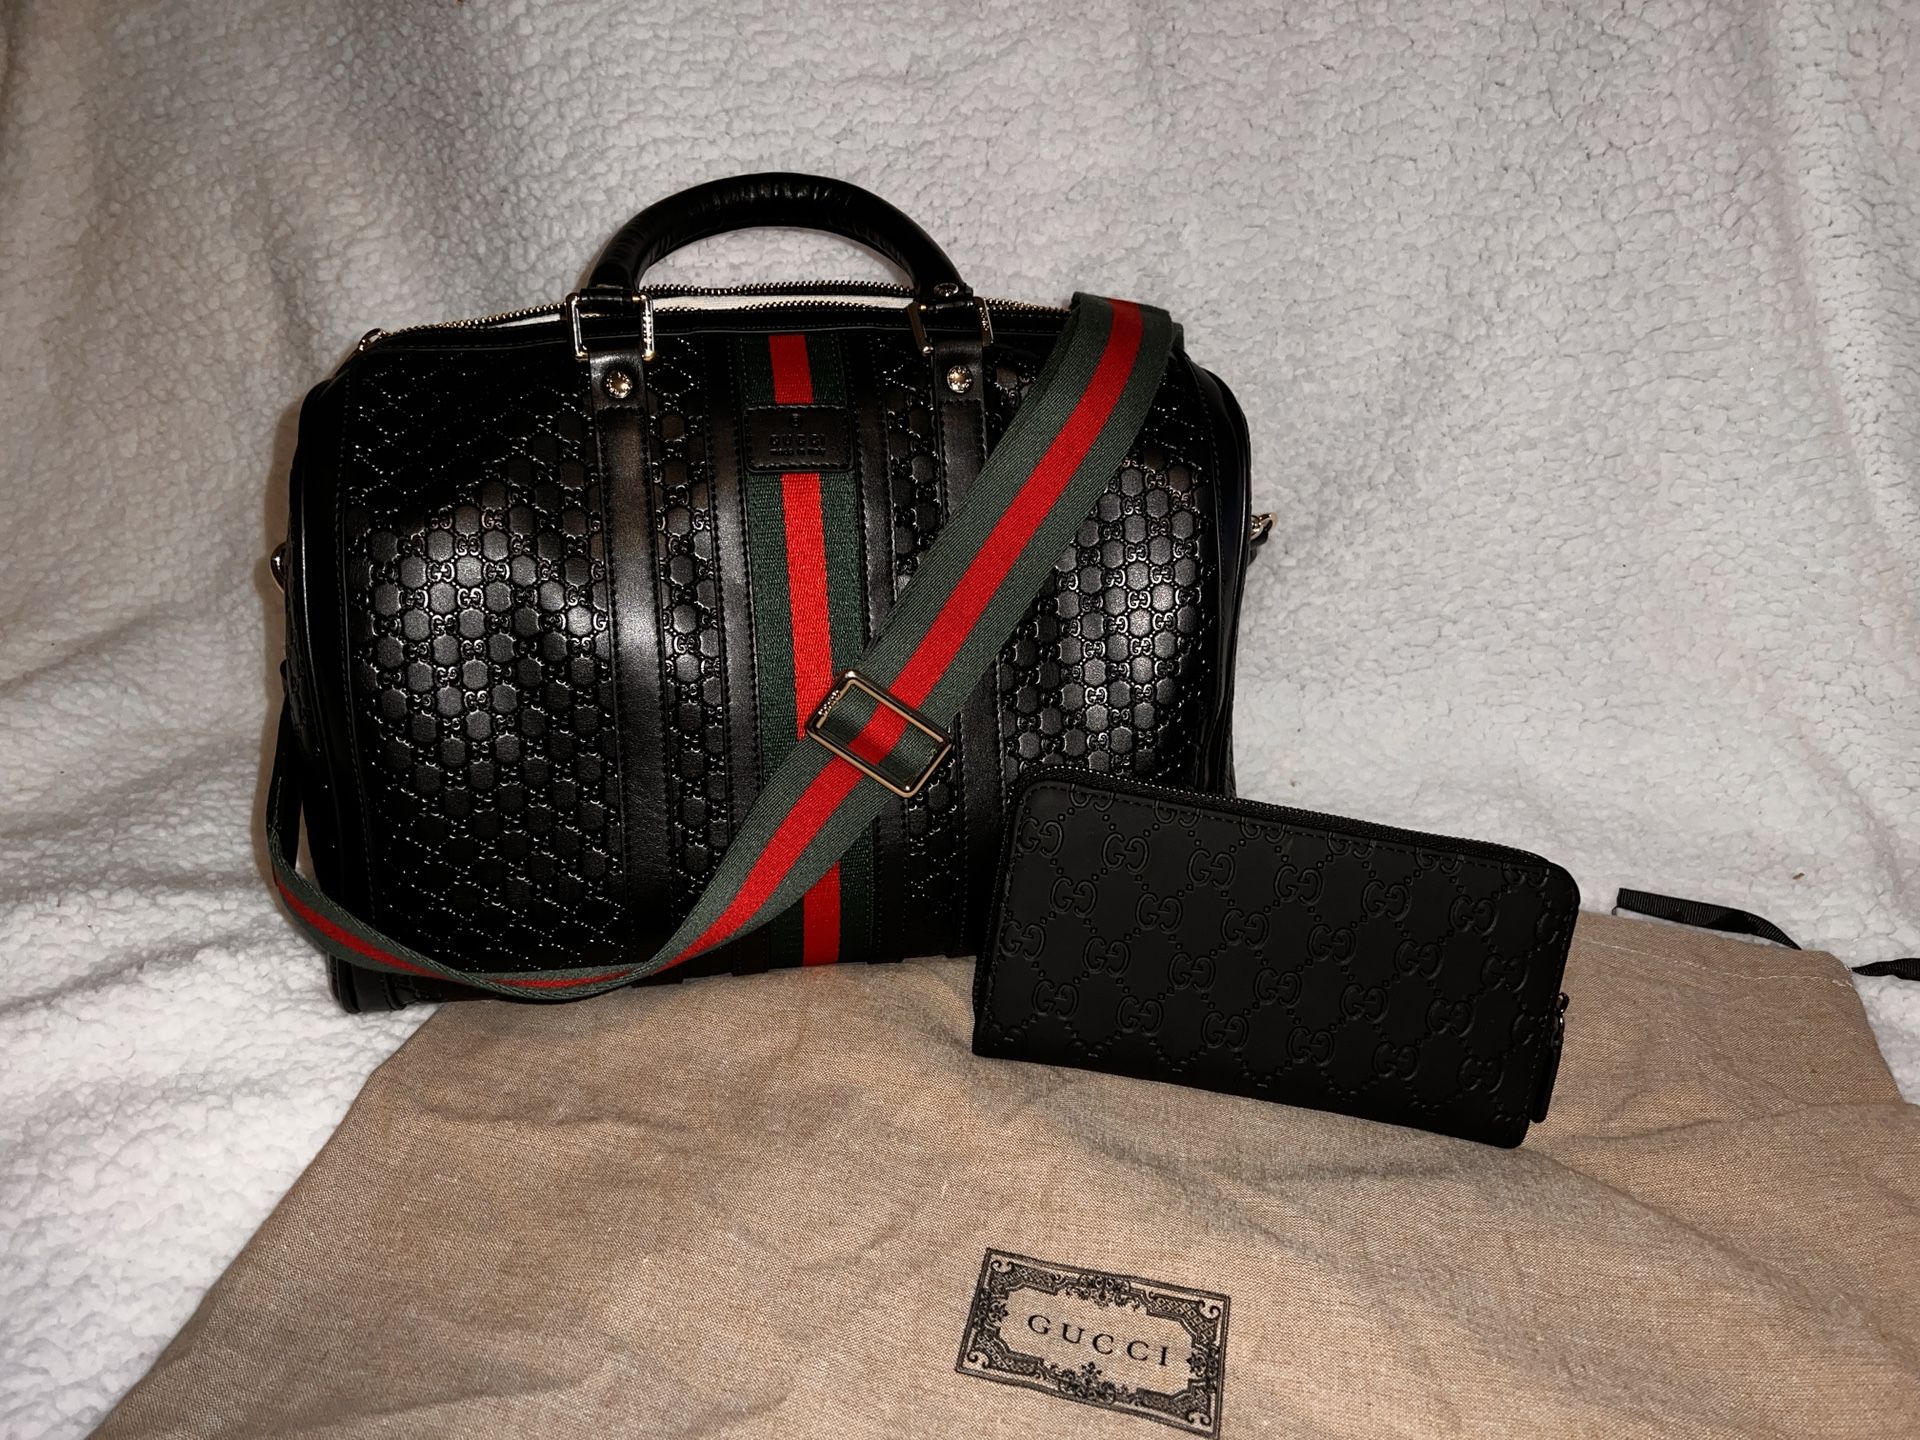  large Speedy Gucci inspo bag & matching wallet